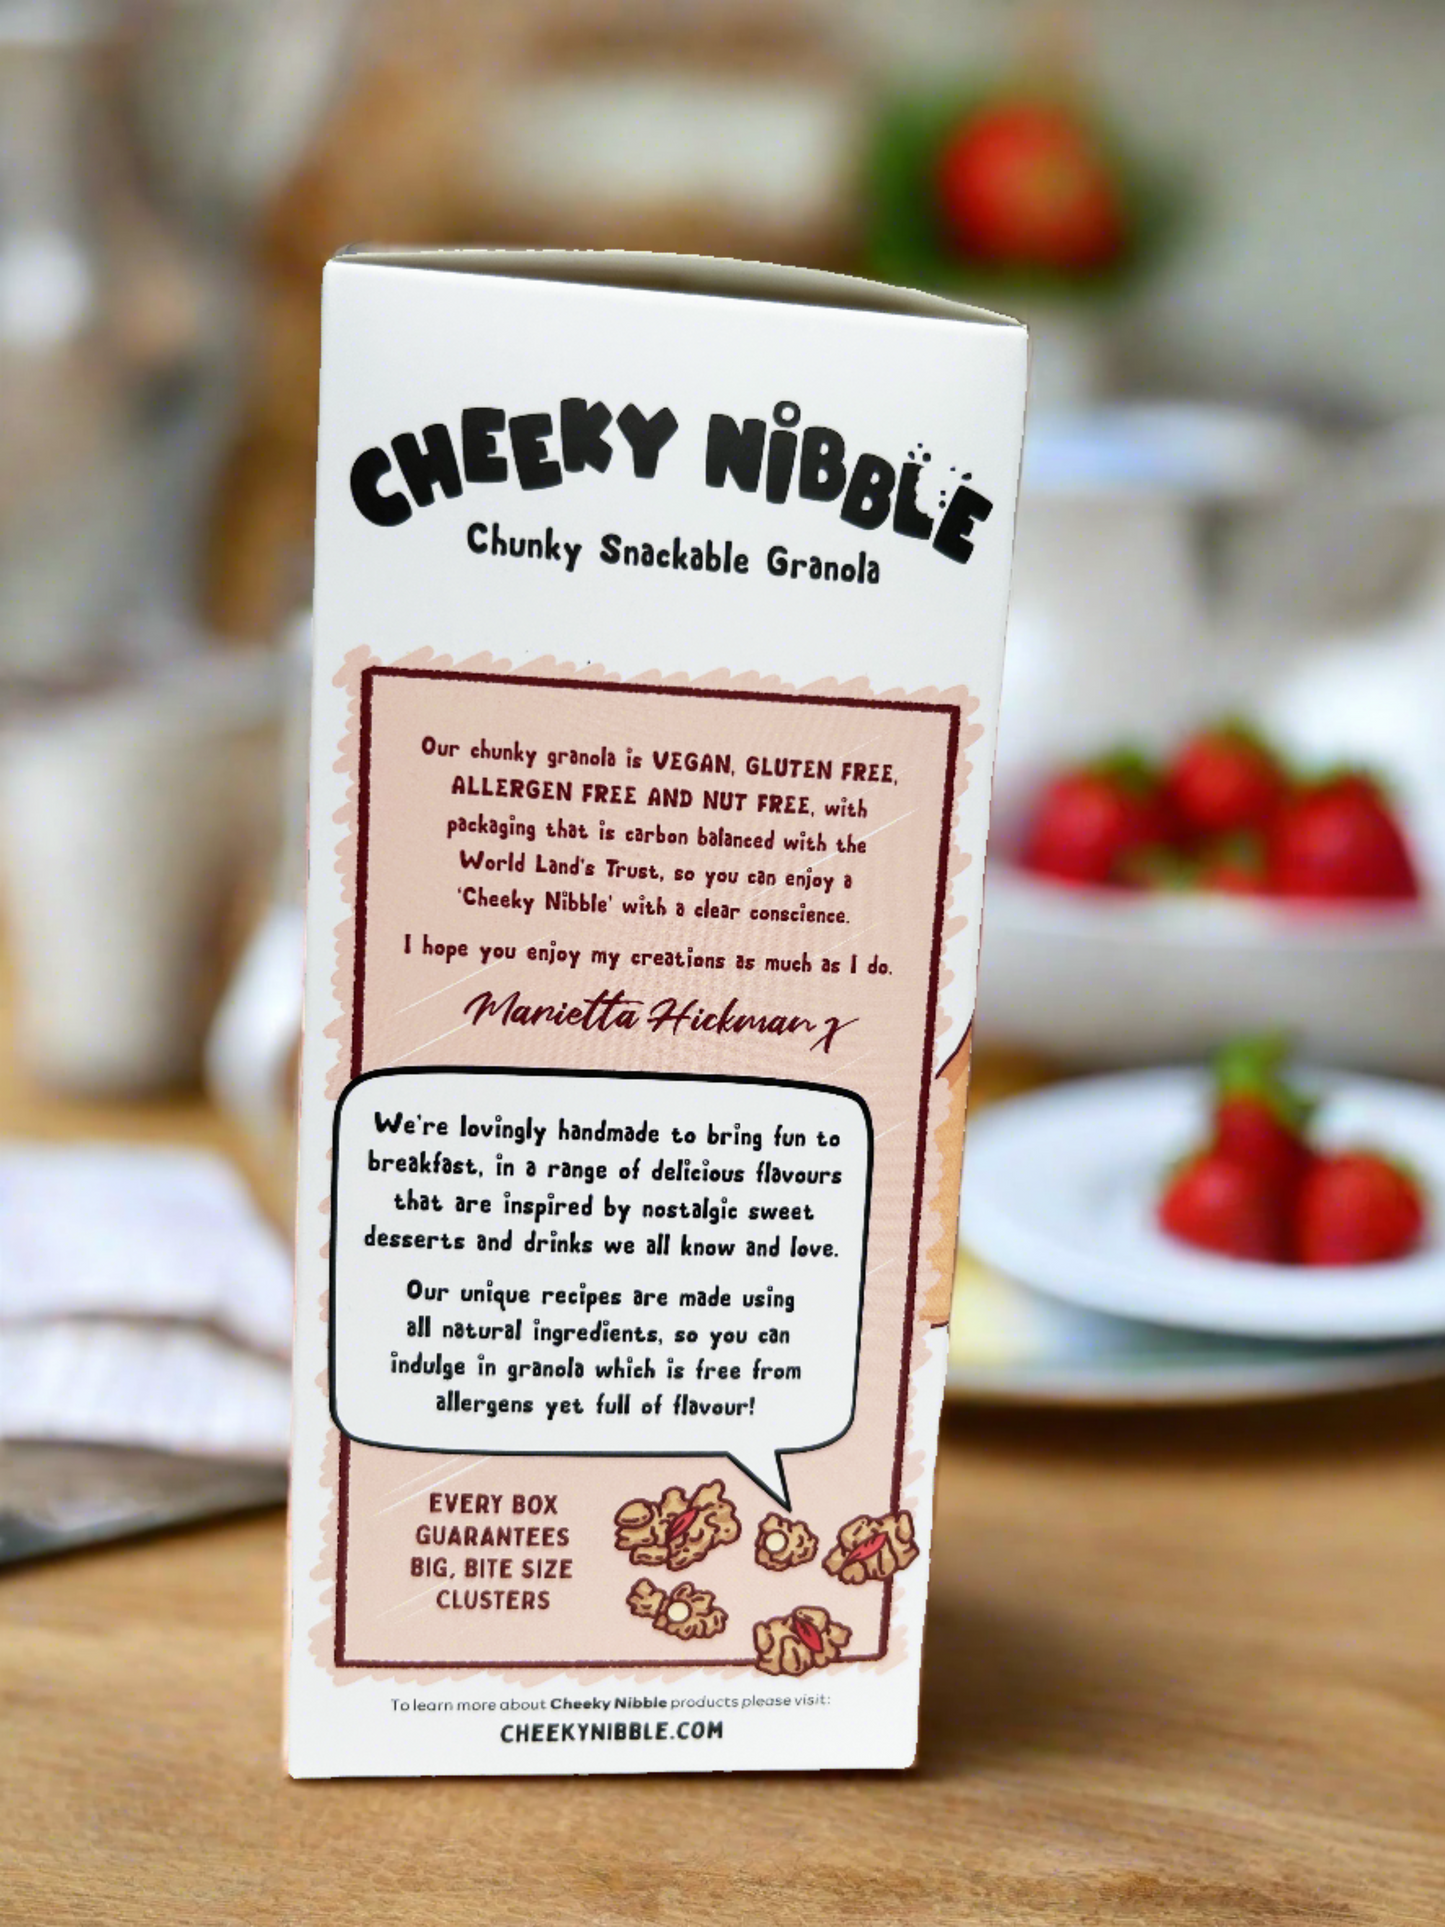 Each chunk is depicted with intricate detail, highlighting its hearty texture and diverse blend of ingredients, including oats, nuts, seeds, and dried fruits. The background may feature a rustic kitchen setting or a lush natural landscape, evoking a sense of wholesome goodness and culinary craftsmanship. Text on the box may describe the crunchy, flavorful nature of the granola, enticing consumers with promises of a satisfying breakfast or snack option rich in taste and nutrients.